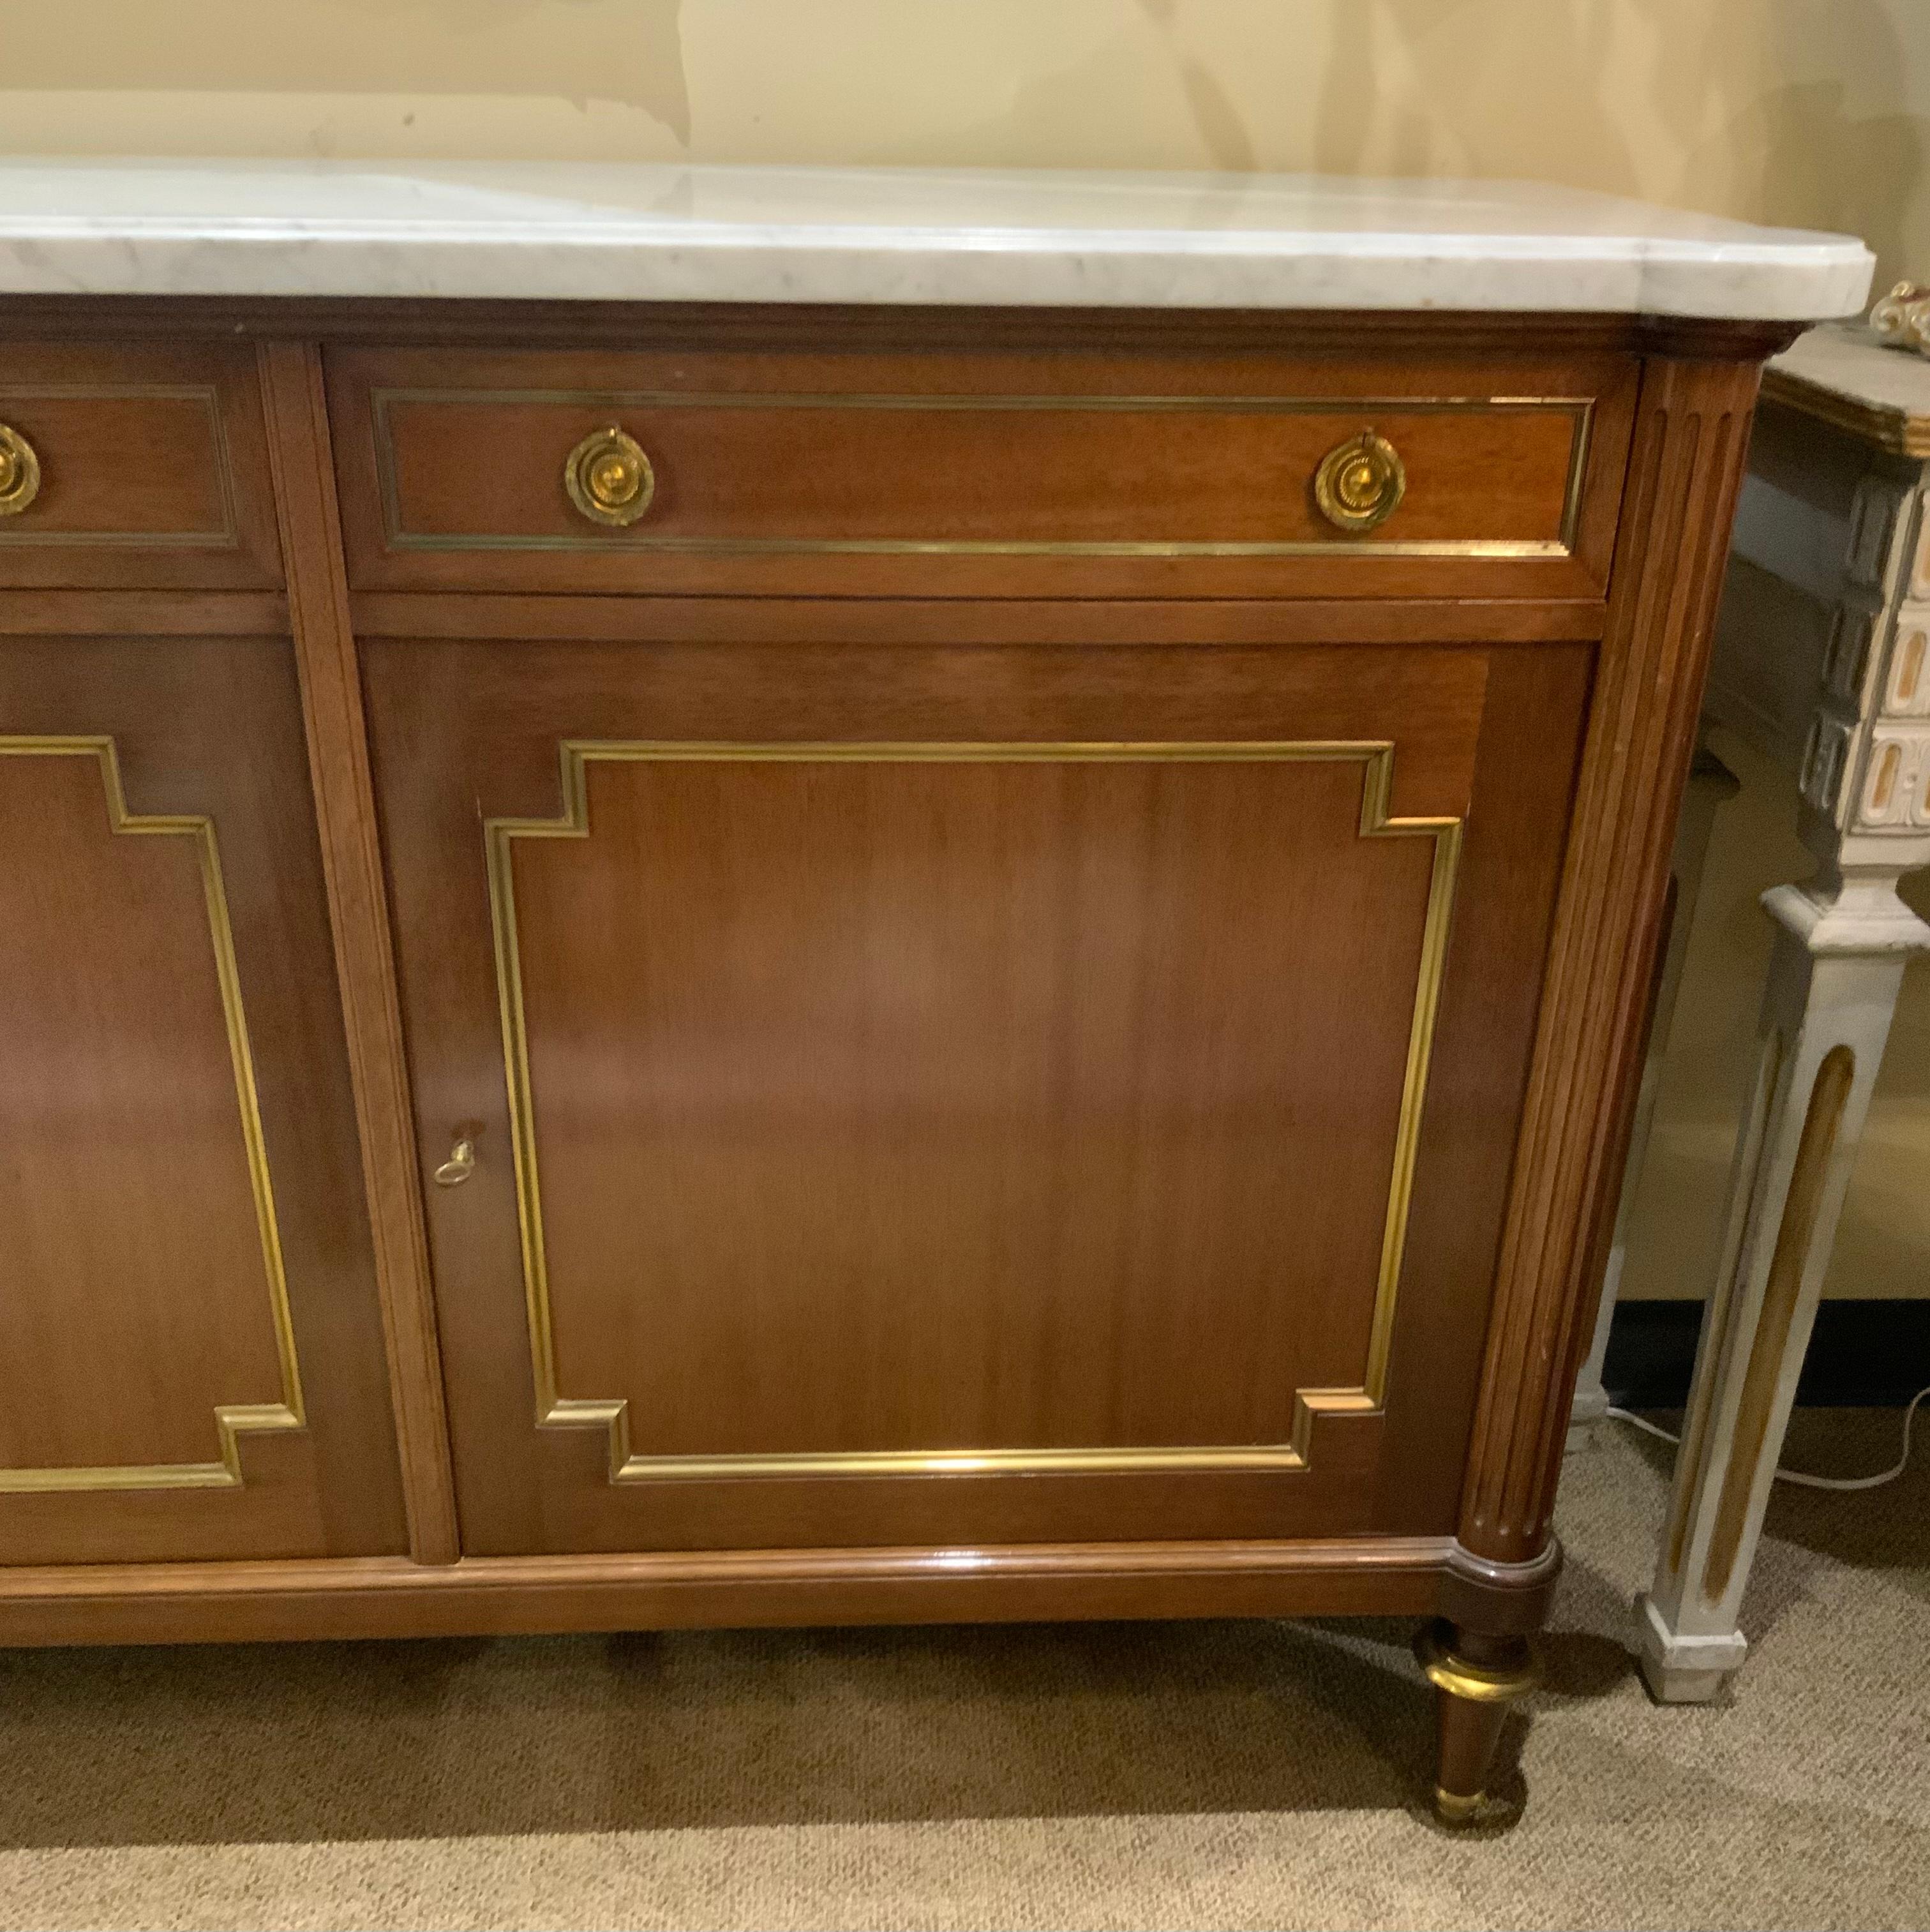 20th Century Louis XVI-Style Mahogany Buffet with Gilt Accents and Bronze Hardware